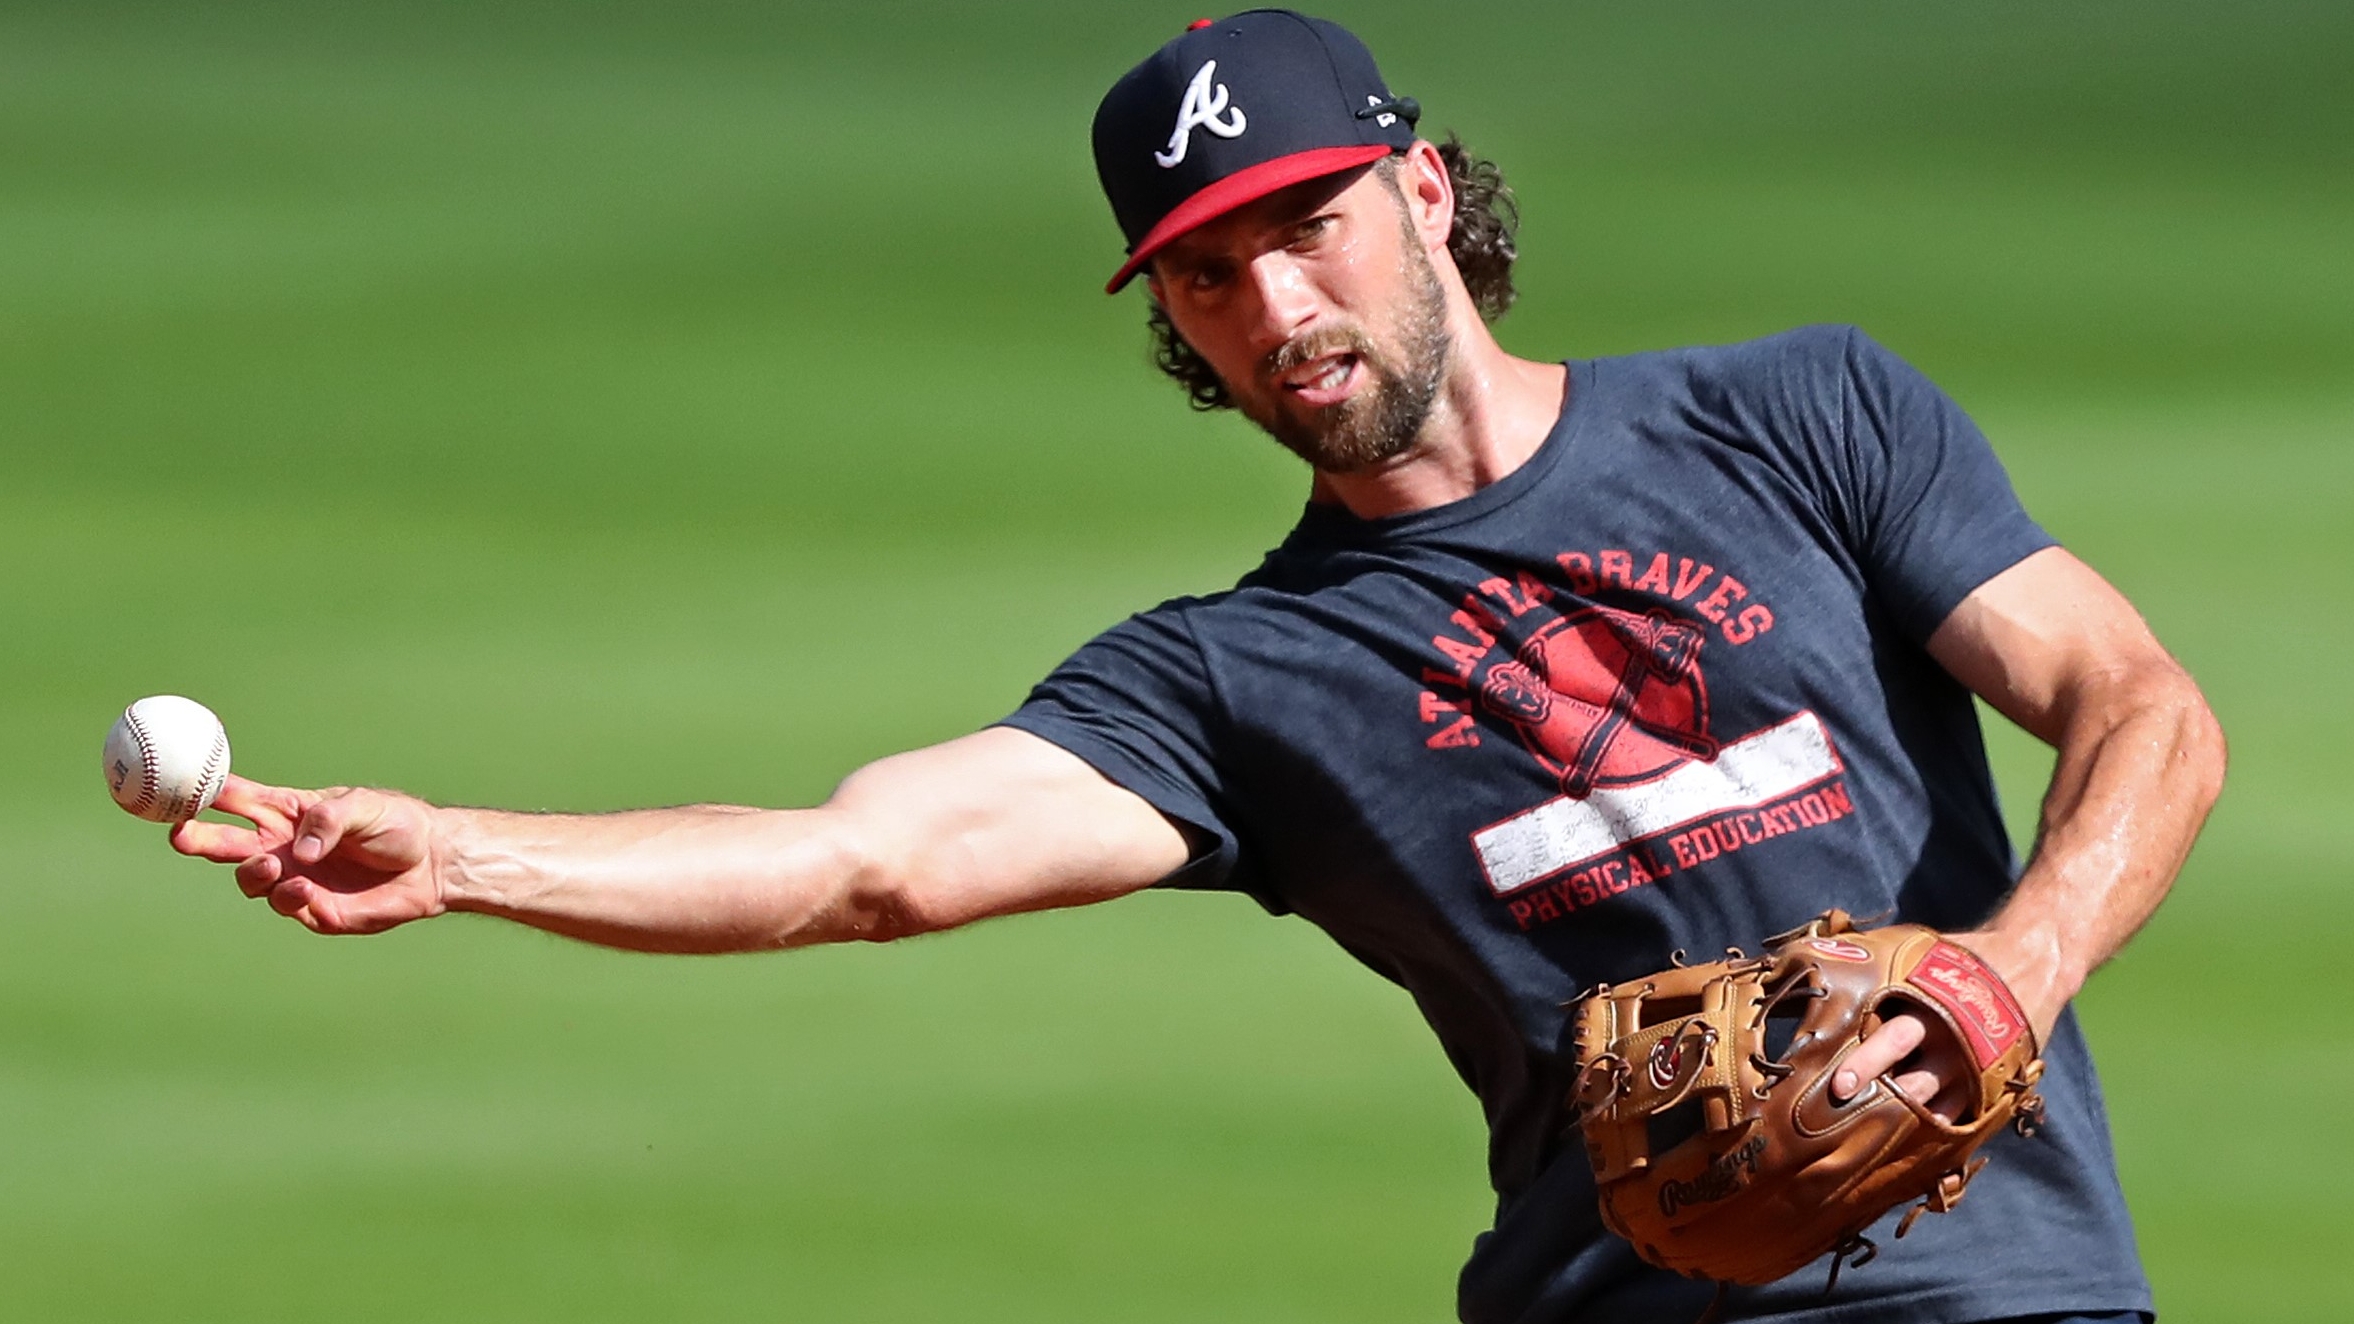 Rangers sign ex-Brave Charlie Culberson to minor-league deal